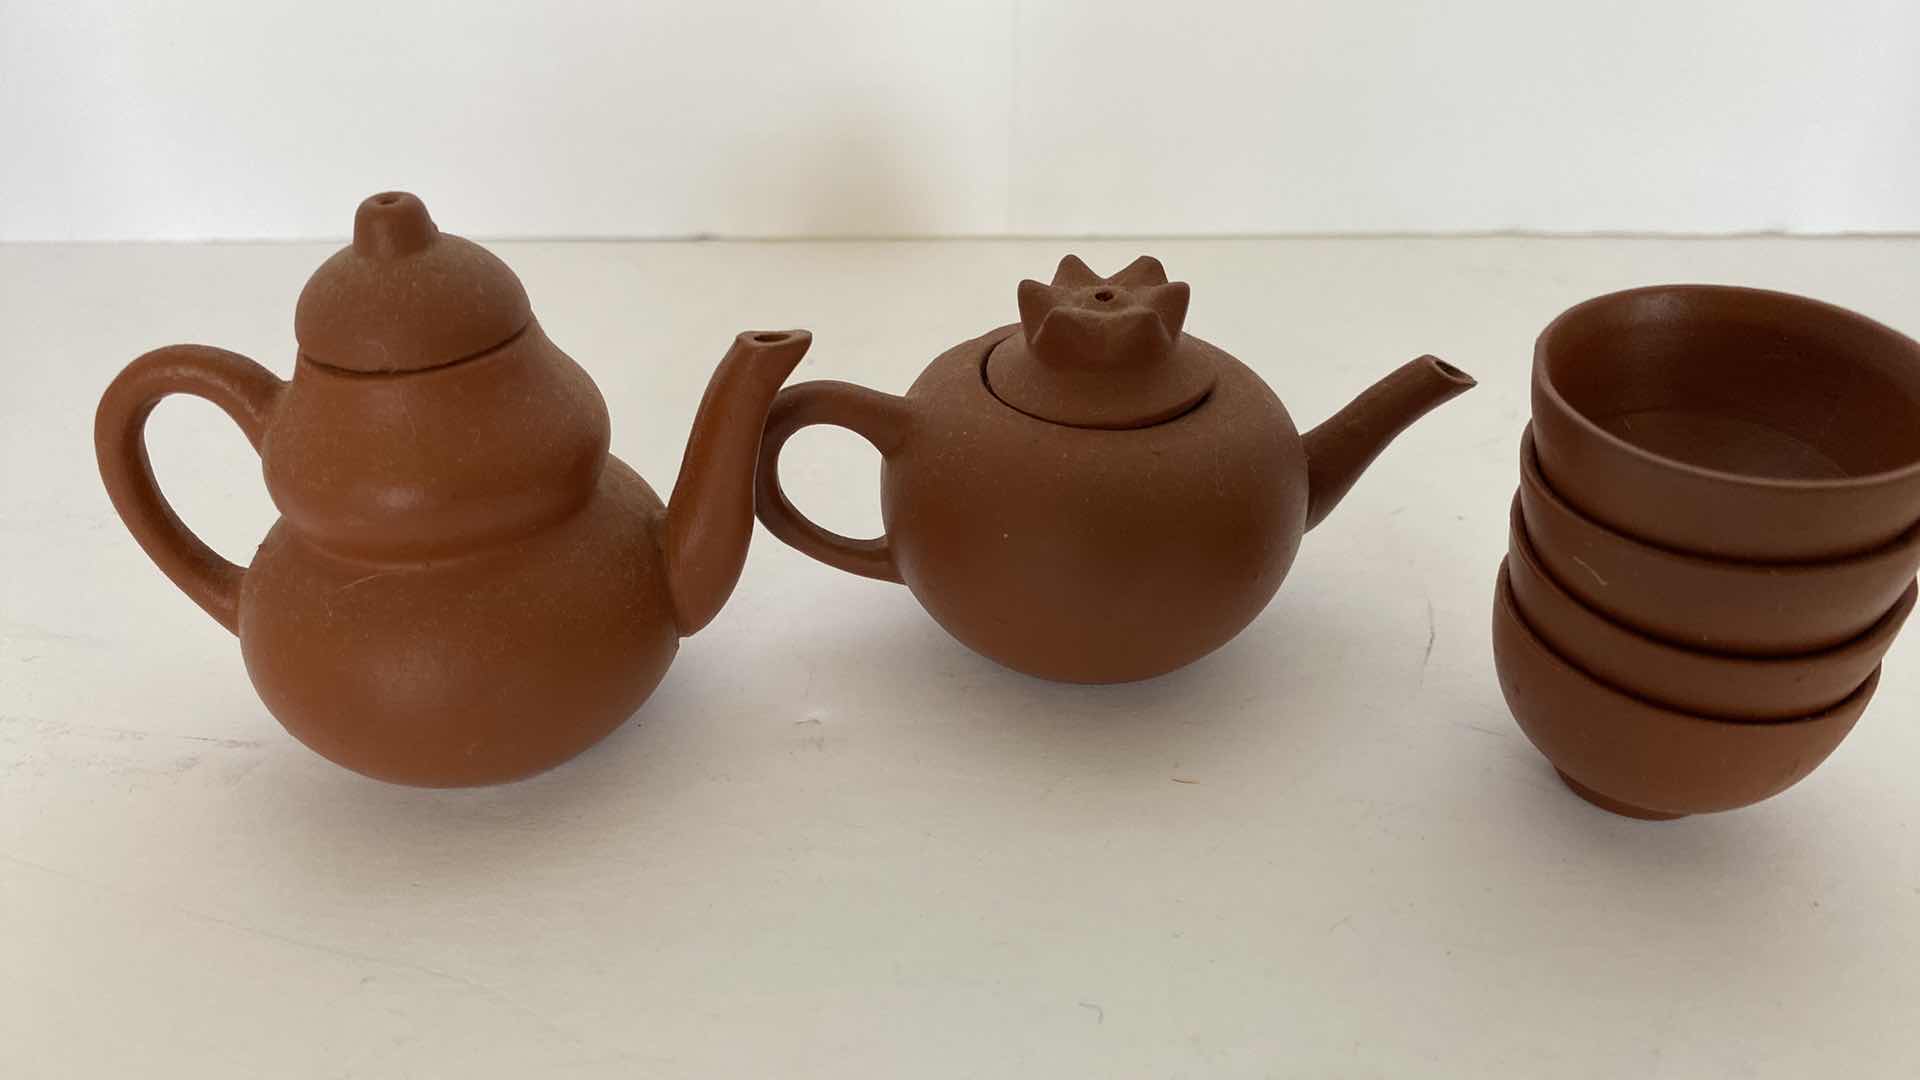 Photo 5 of PAIR OF VINTAGE CHINESE COLLECTIBLE CLAY TEA POTS WITH 4 TEA CUPS LARGEST TEAPOT 3 1/4” x 1 3/4”